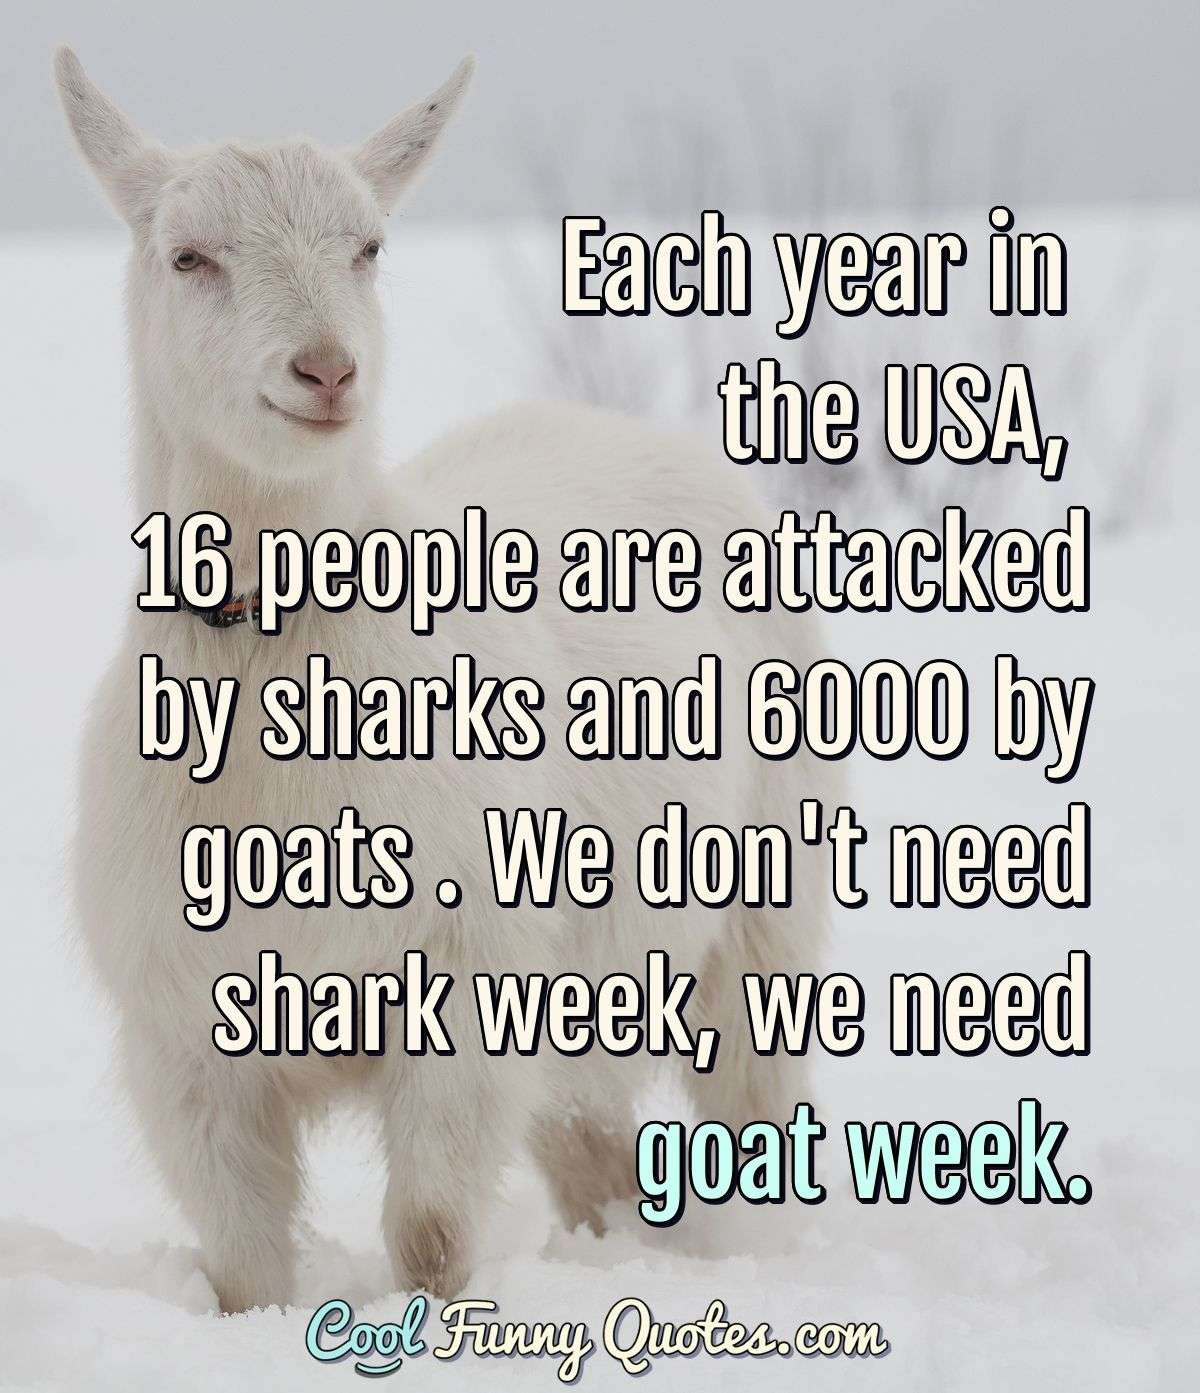 Each year in the USA, 16 people are attacked by sharks and 6000 by goats . We don't need shark week, we need goat week. - Anonymous